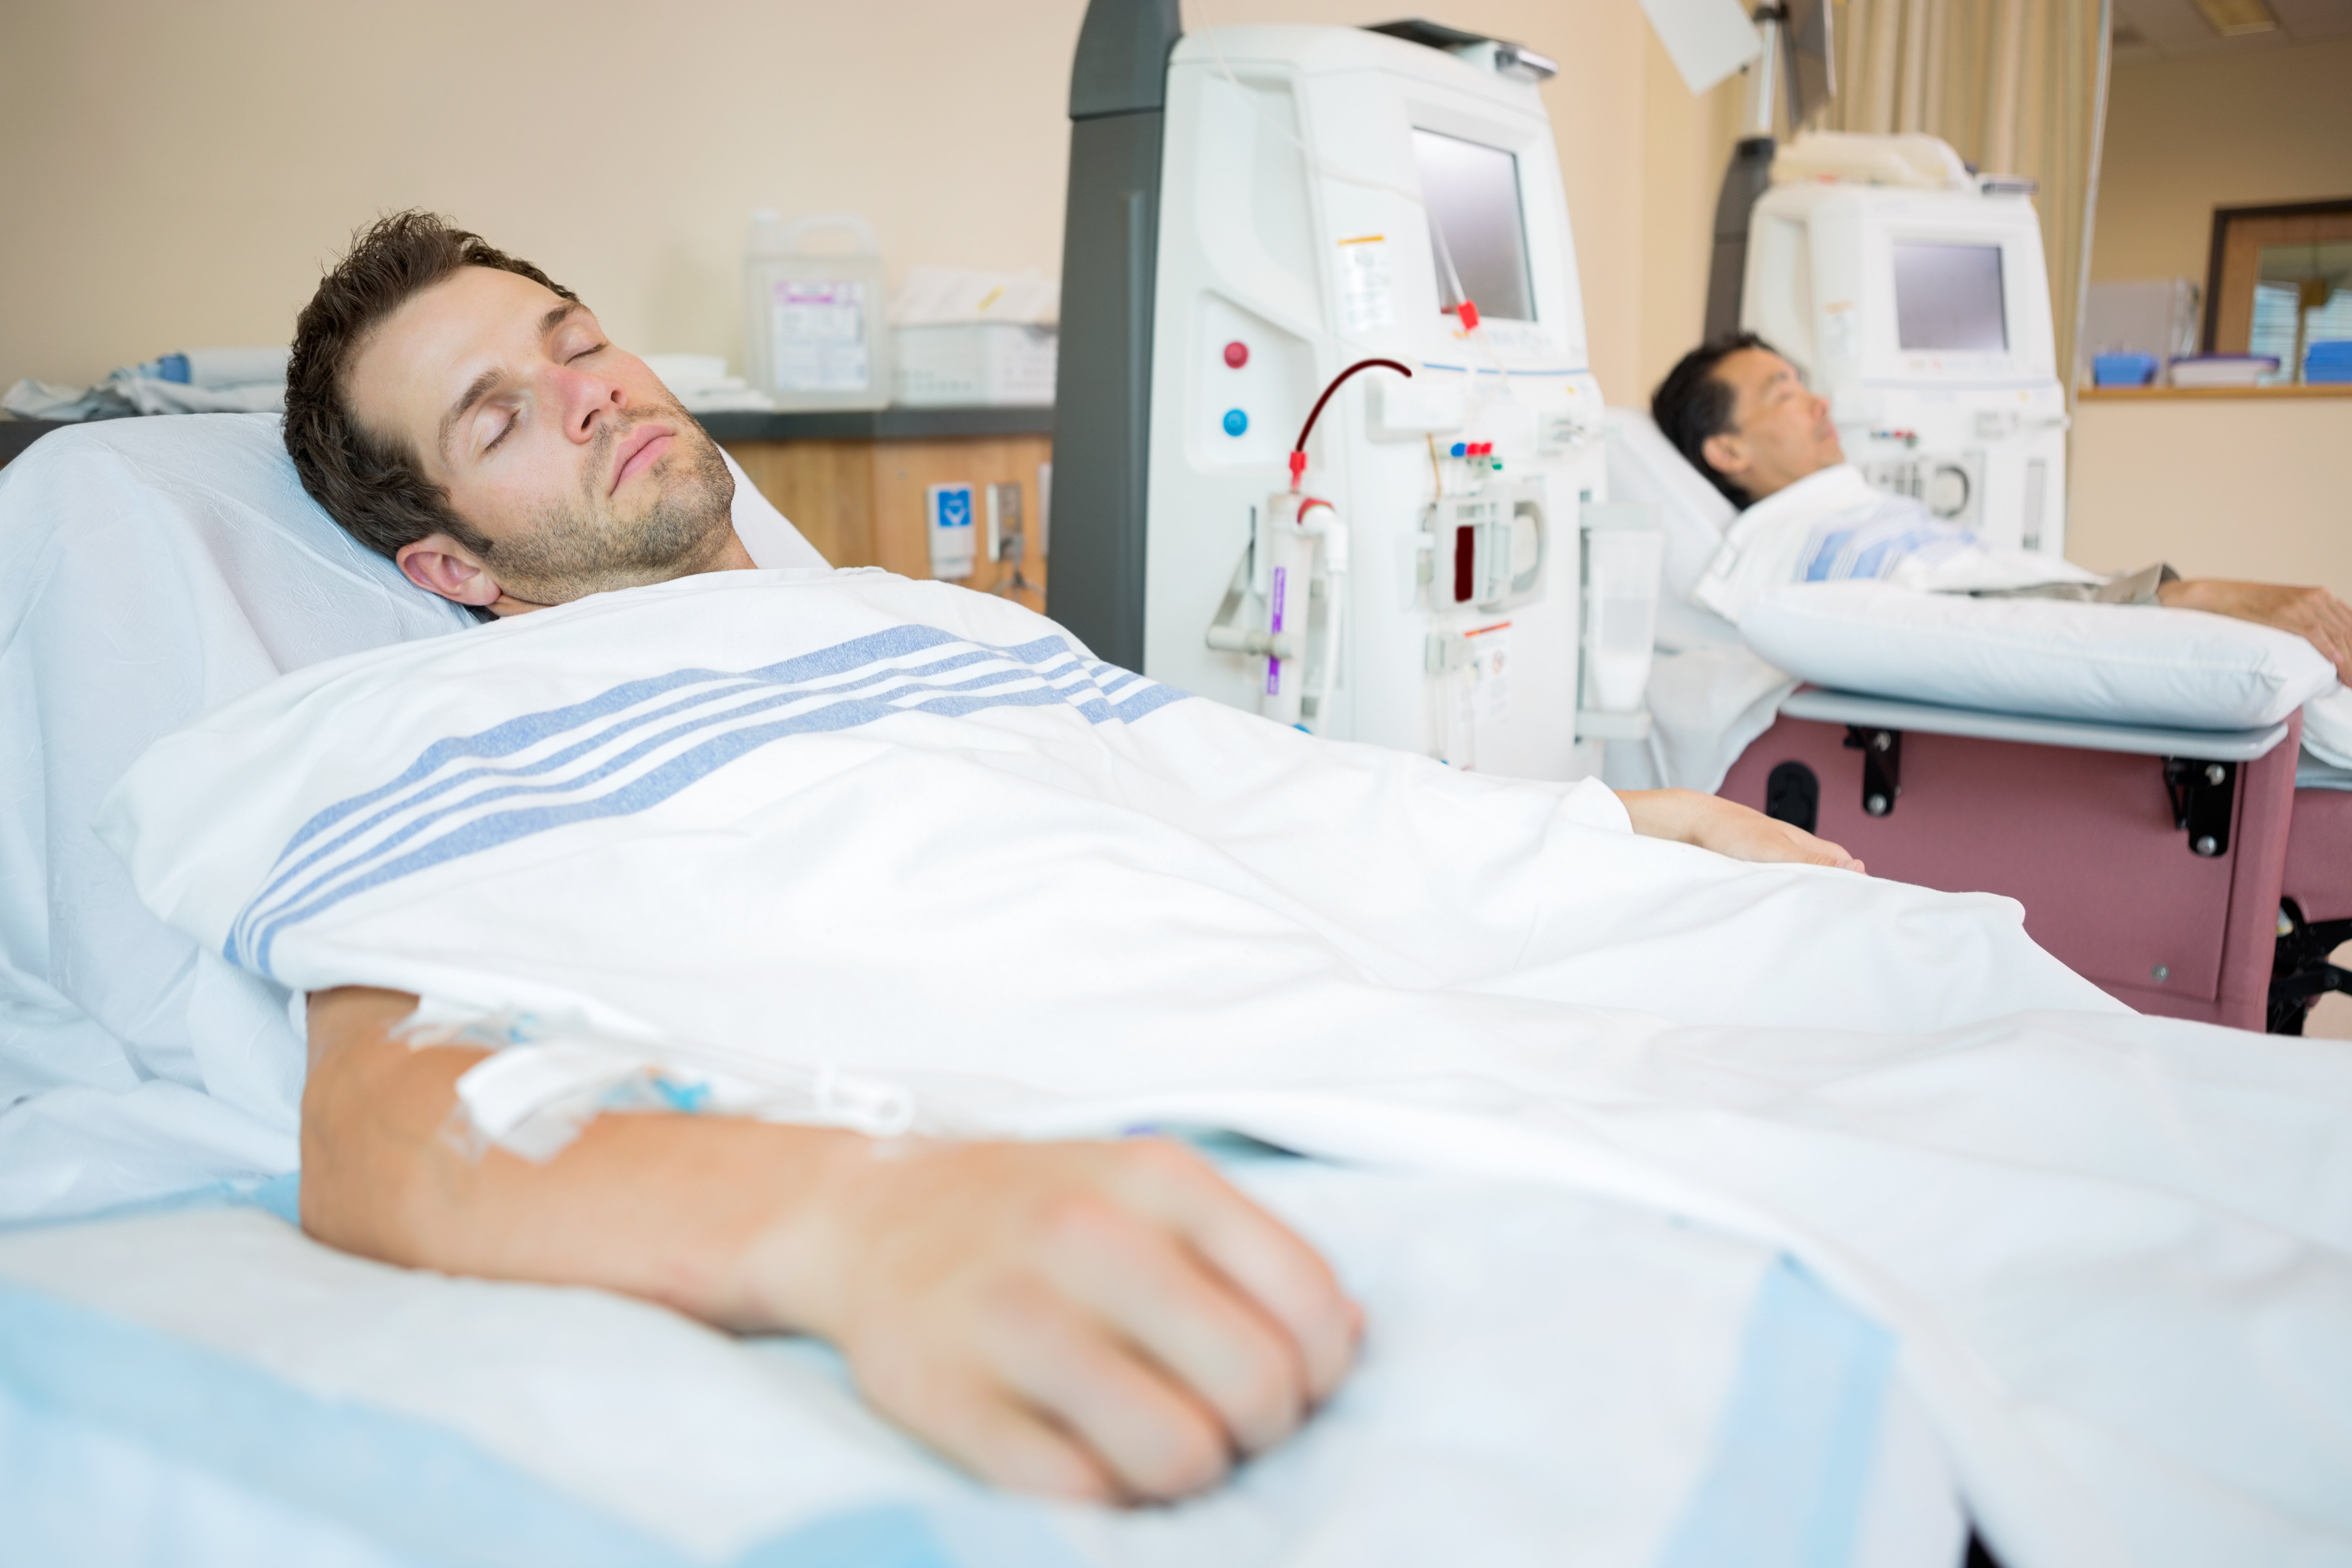 Male patients sleeping while receiving renal dialysis in chemo room at hospital | Photo: Shutterstock.com